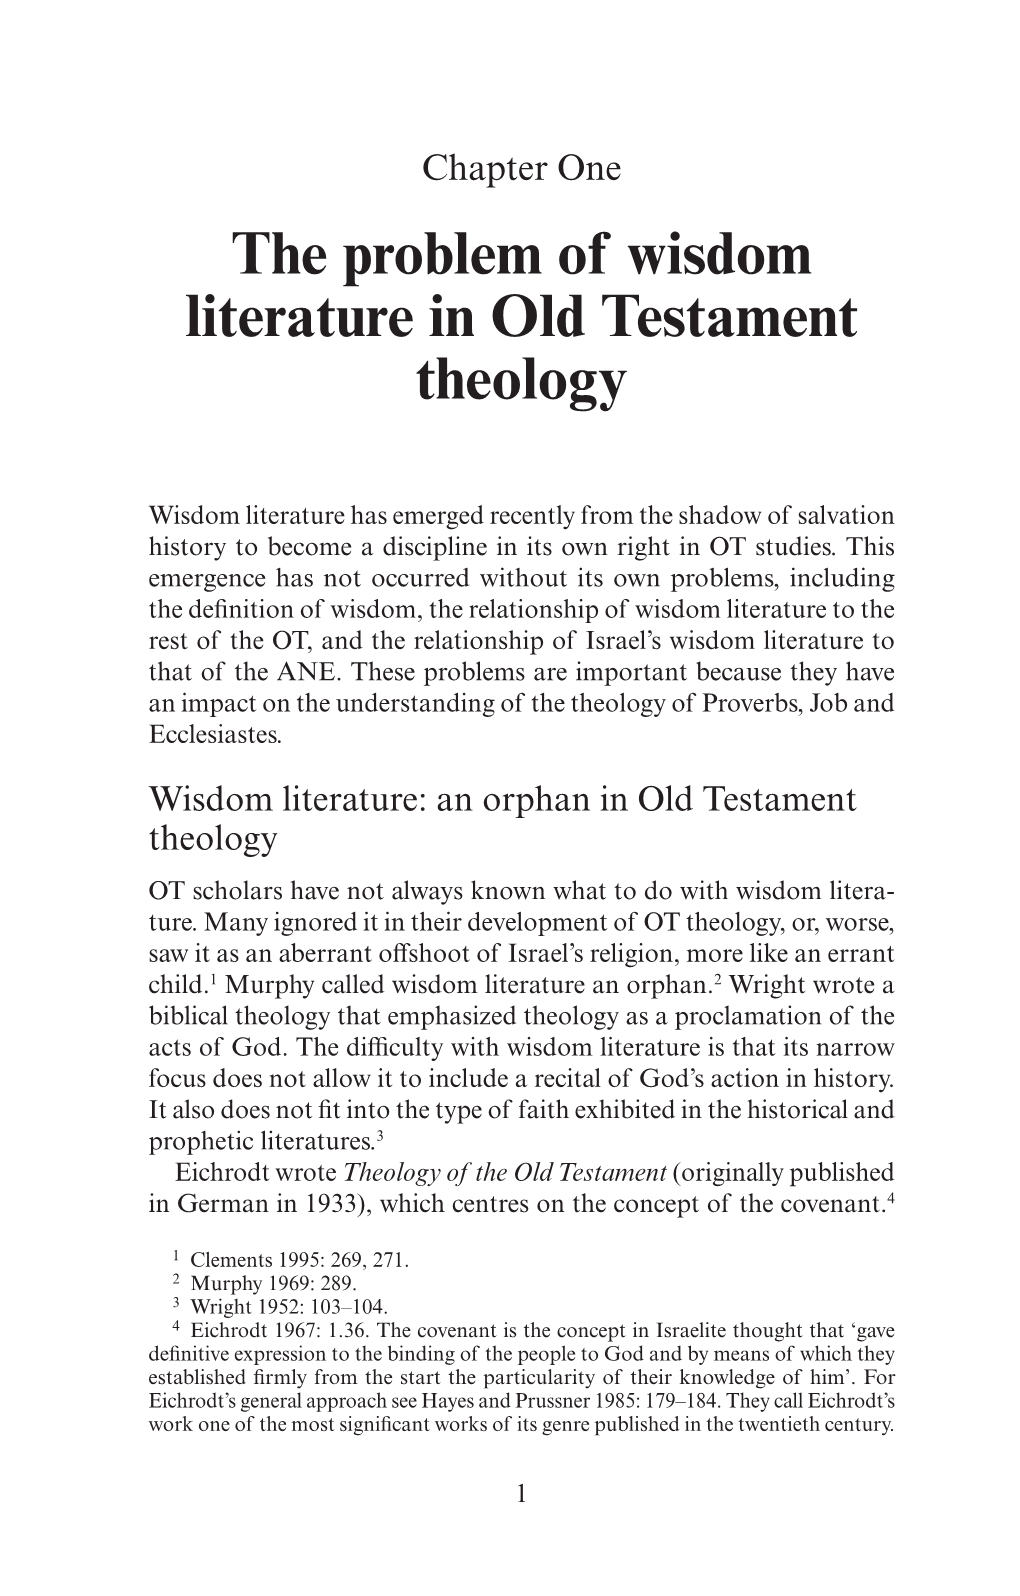 The Problem of Wisdom Literature in Old Testament Theology